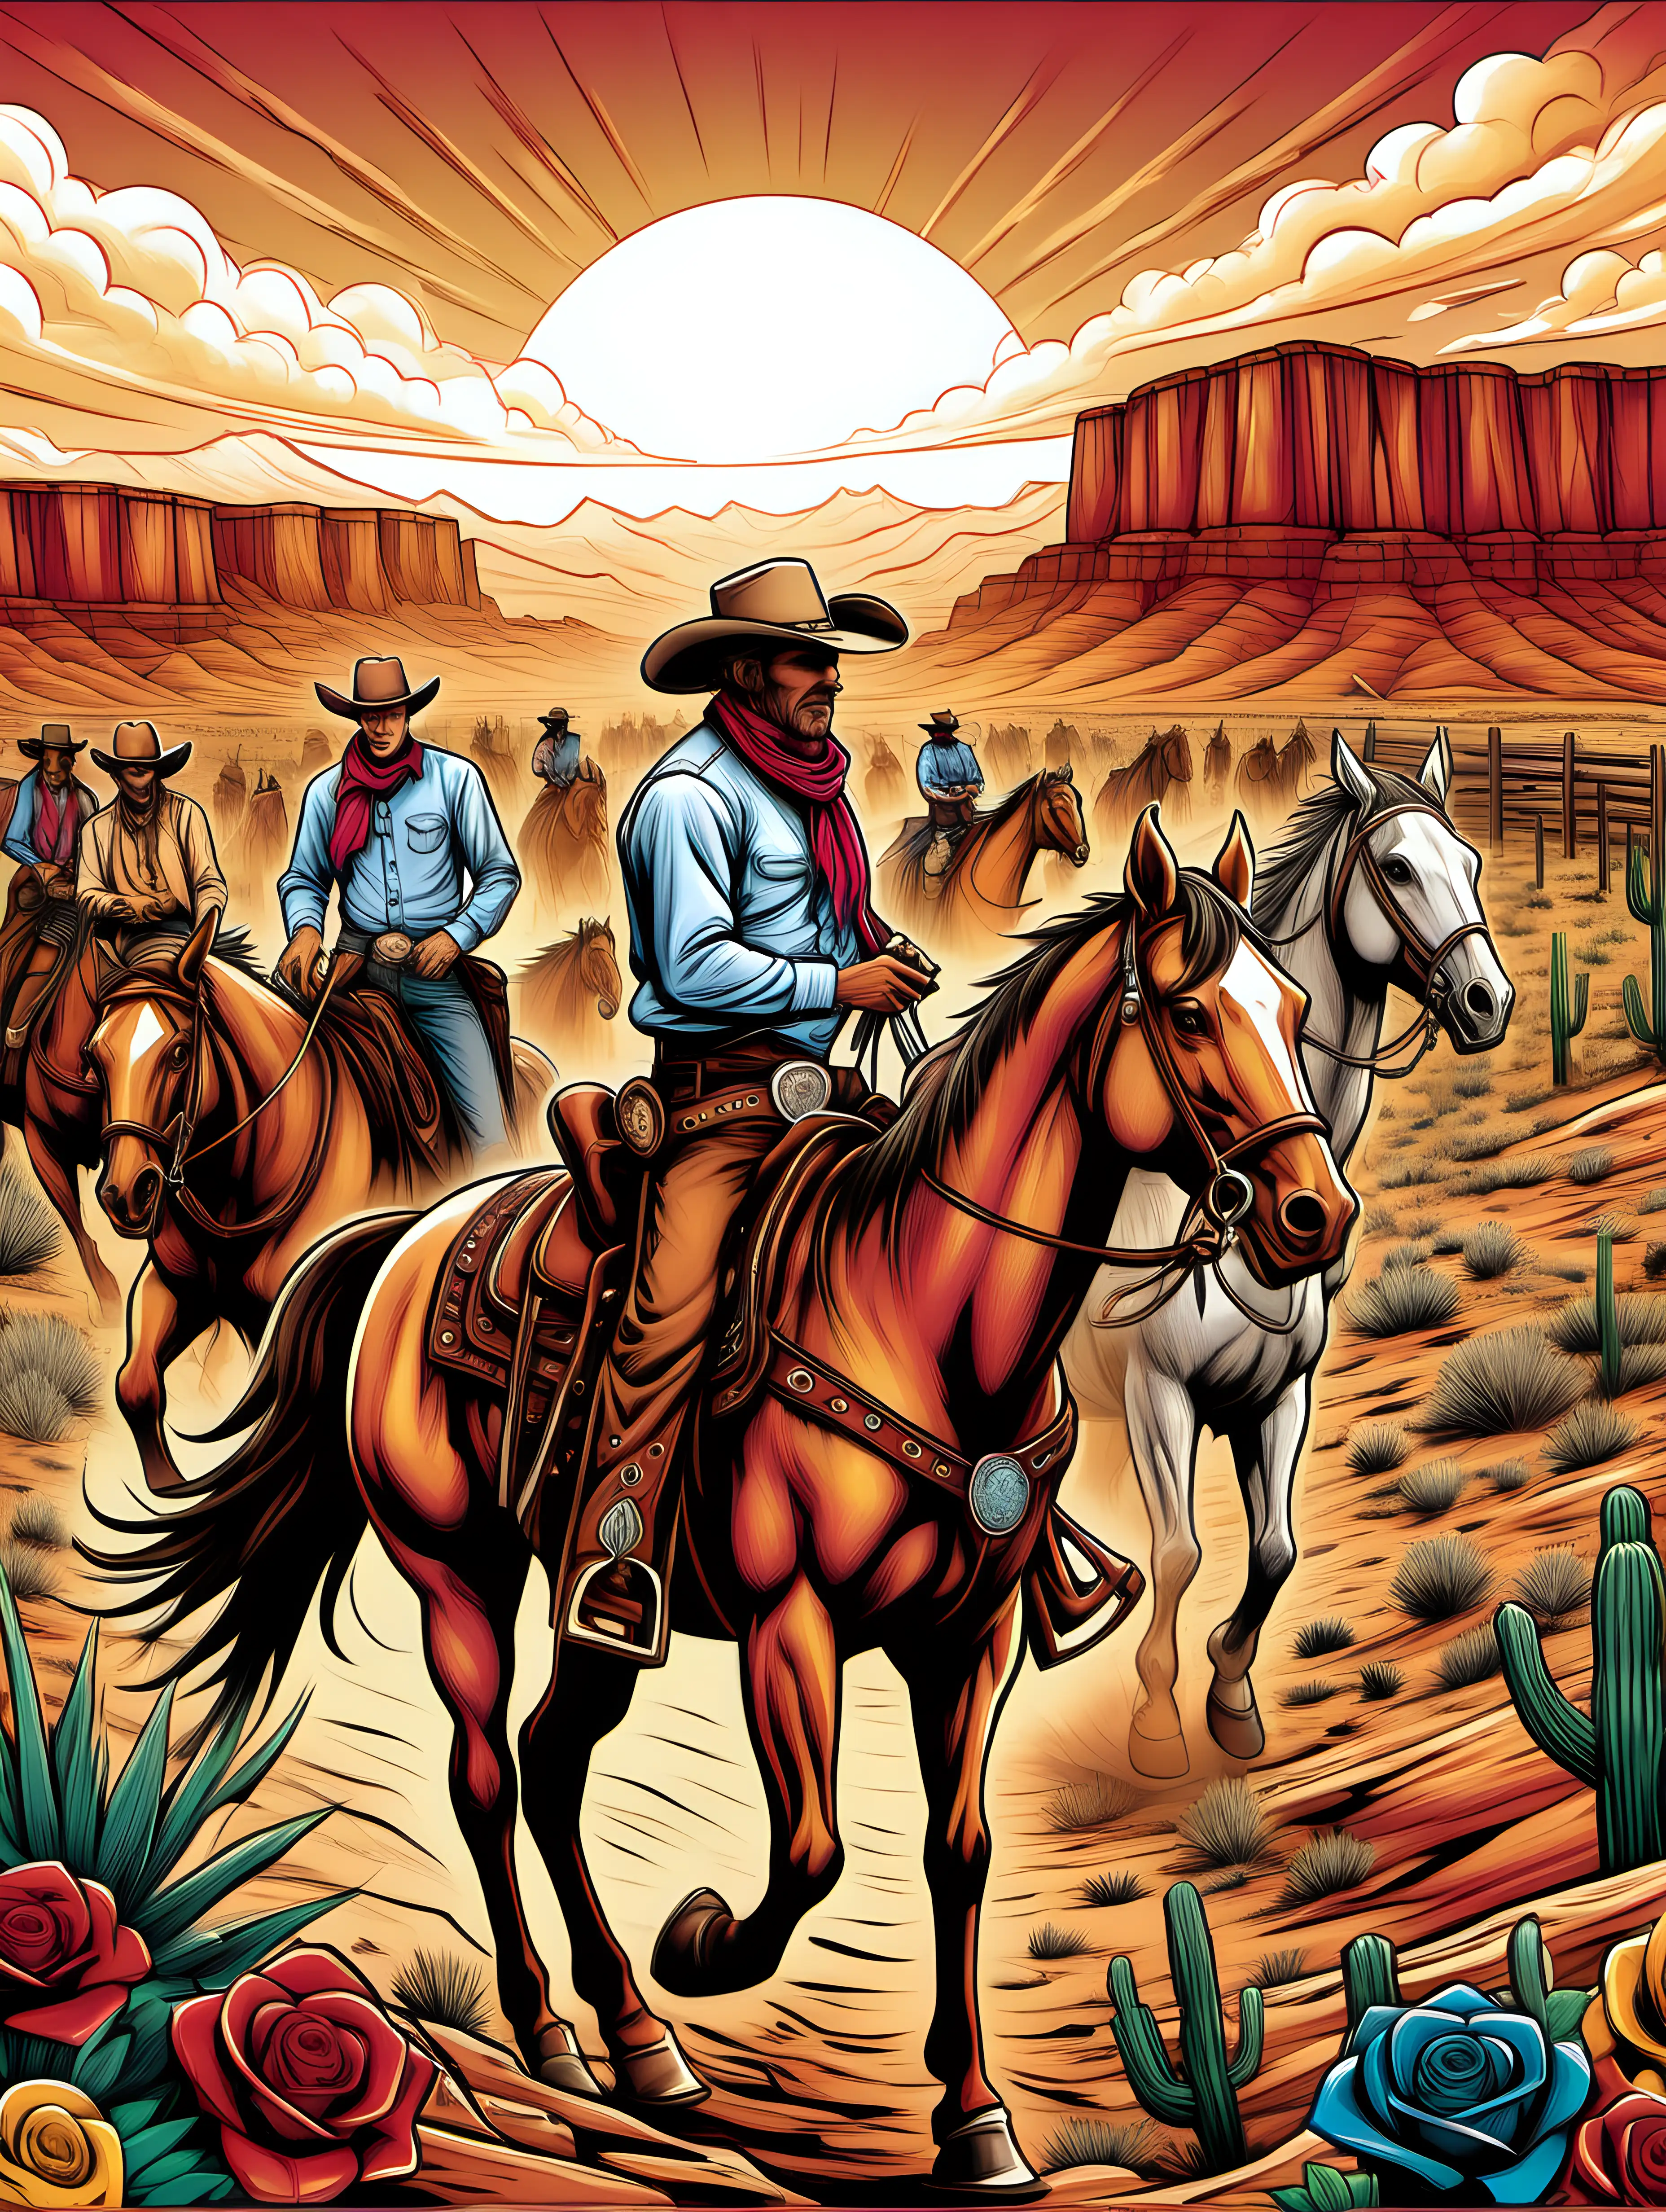 Design an eye-catching coloring book cover without words that vividly captures the spirit of the Old West in a riot of colors. Envision a dynamic scene featuring iconic elements such as cowboys, horses, saloons, and expansive landscapes. Incorporate a diverse palette to evoke the vibrant hues of the frontier - warm earth tones, bold sunsets, and vivid pops of color from clothing and accessories